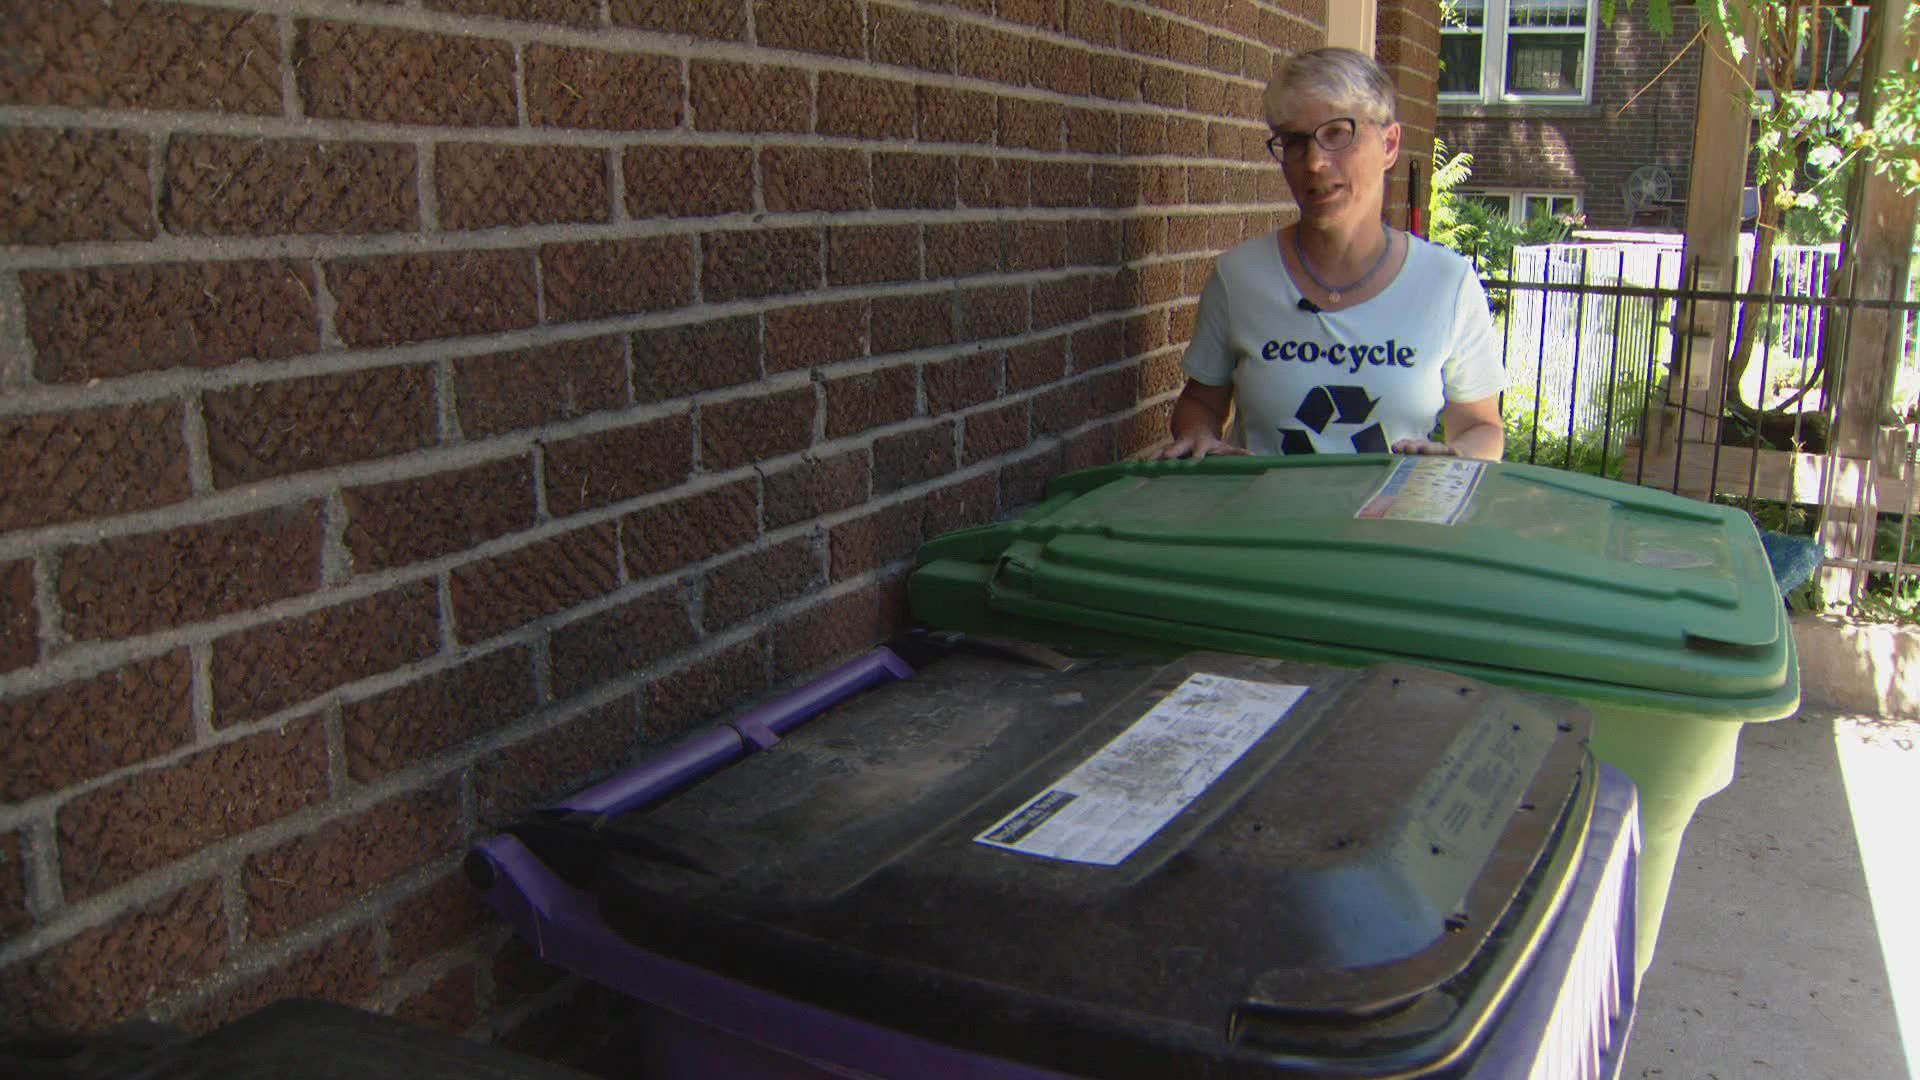 The ordinance will also result in weekly recycling and compost collection for Denver trash collection customers.